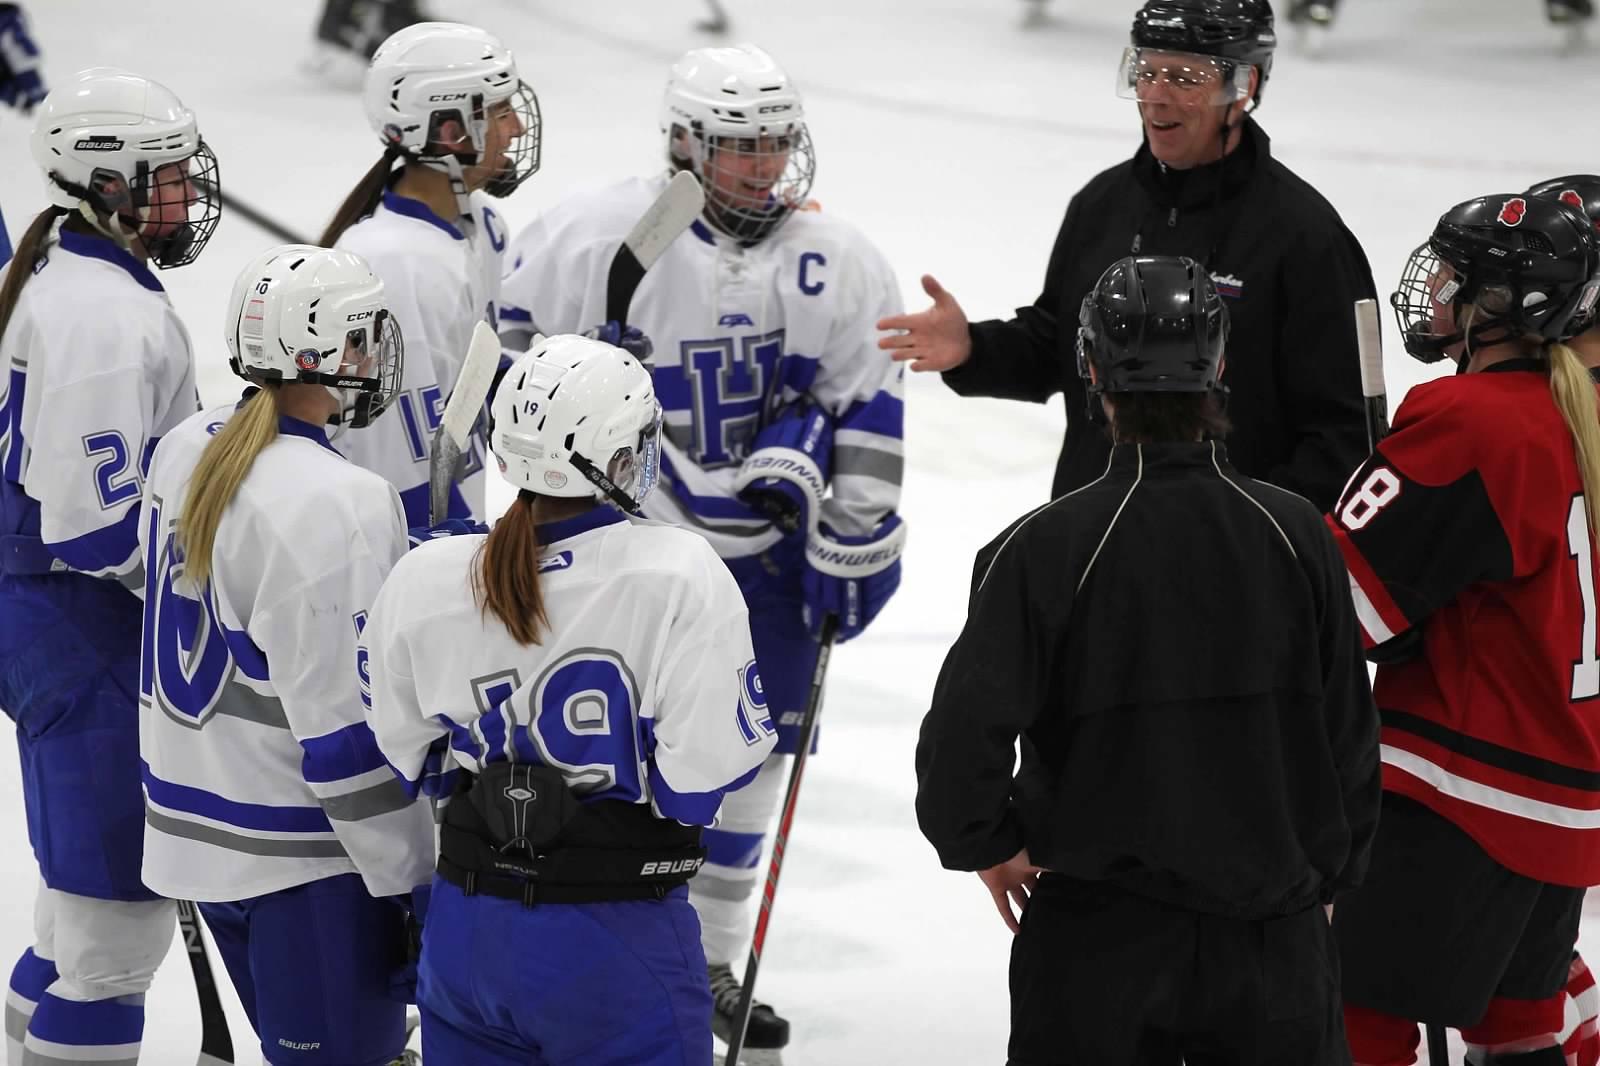 Girls+hockey+ends+season+with+frustrating+loss%2C+confident+about+the+future